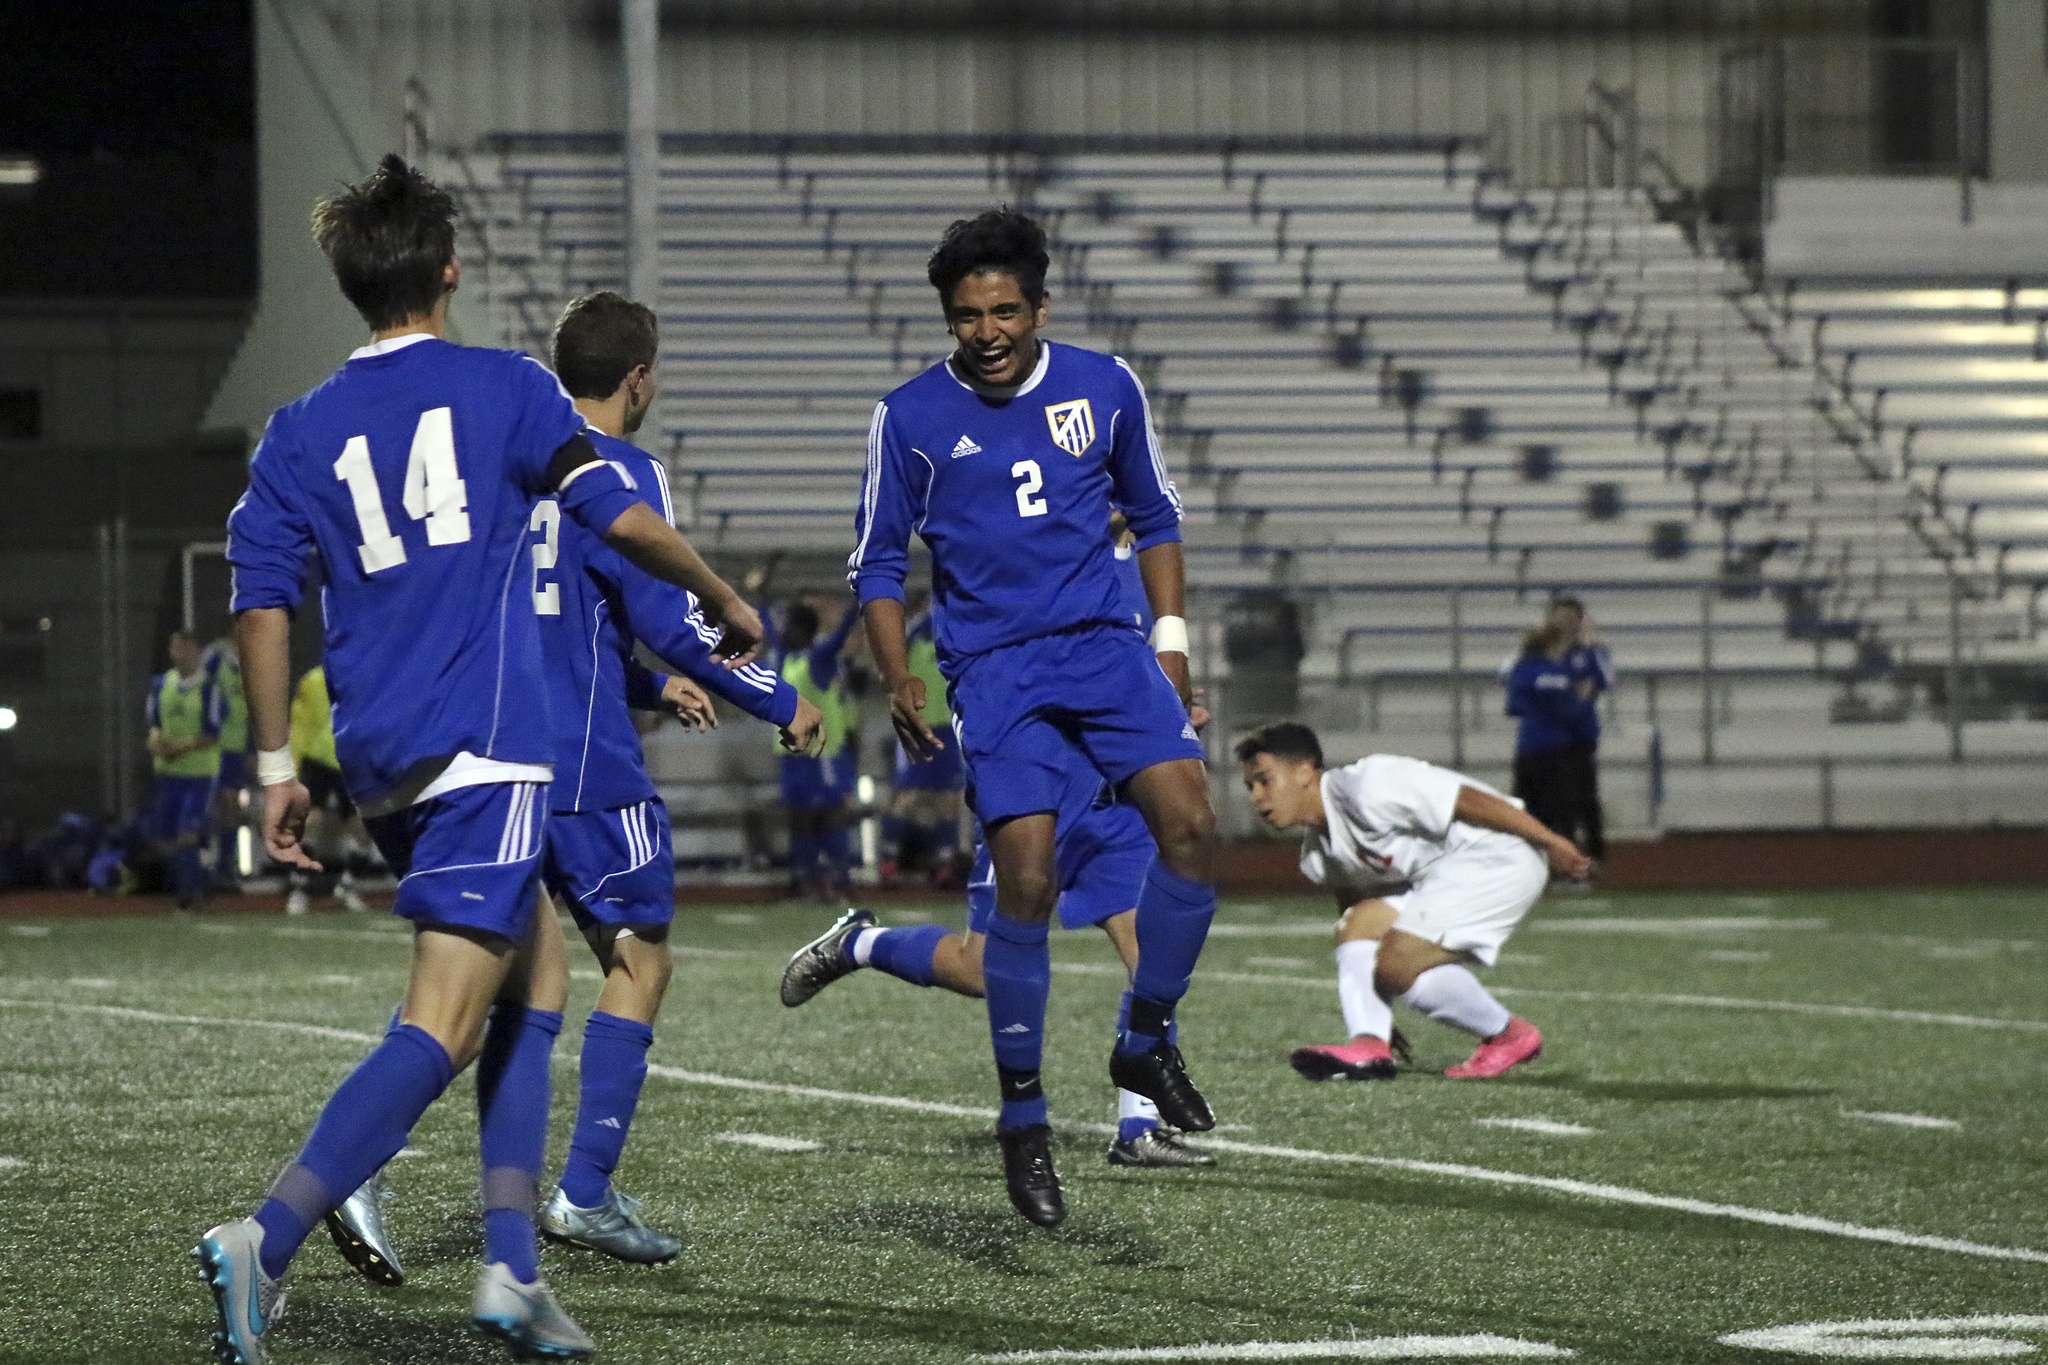 Tahoma players Cris Garfias (right) celebrates with teammates Robby Guyer (middle) and Charlie Wilcox (left) after the Bears’ second goal of the night during their 2-0 win against Thomas Jefferson in the West Central District tourmament on May 12 at Curtis’ Viking Stadium. TERRENCE HILL